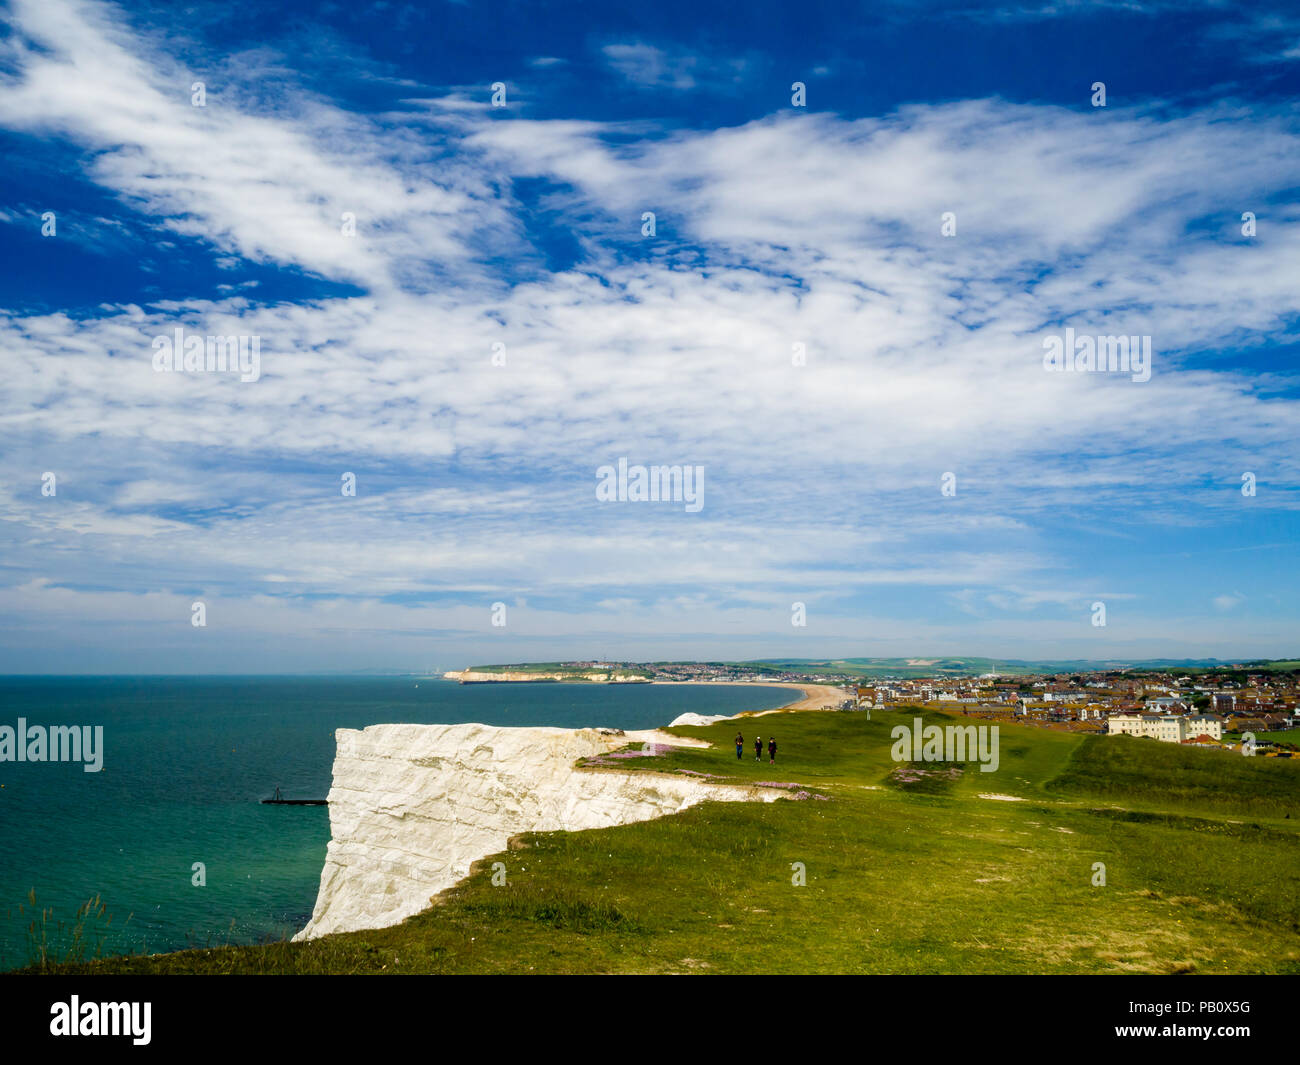 People walking on Seaford Head, East Sussex, UK, with the towns of Seaford and Newhaven in the background on a sunny spring day. Stock Photo